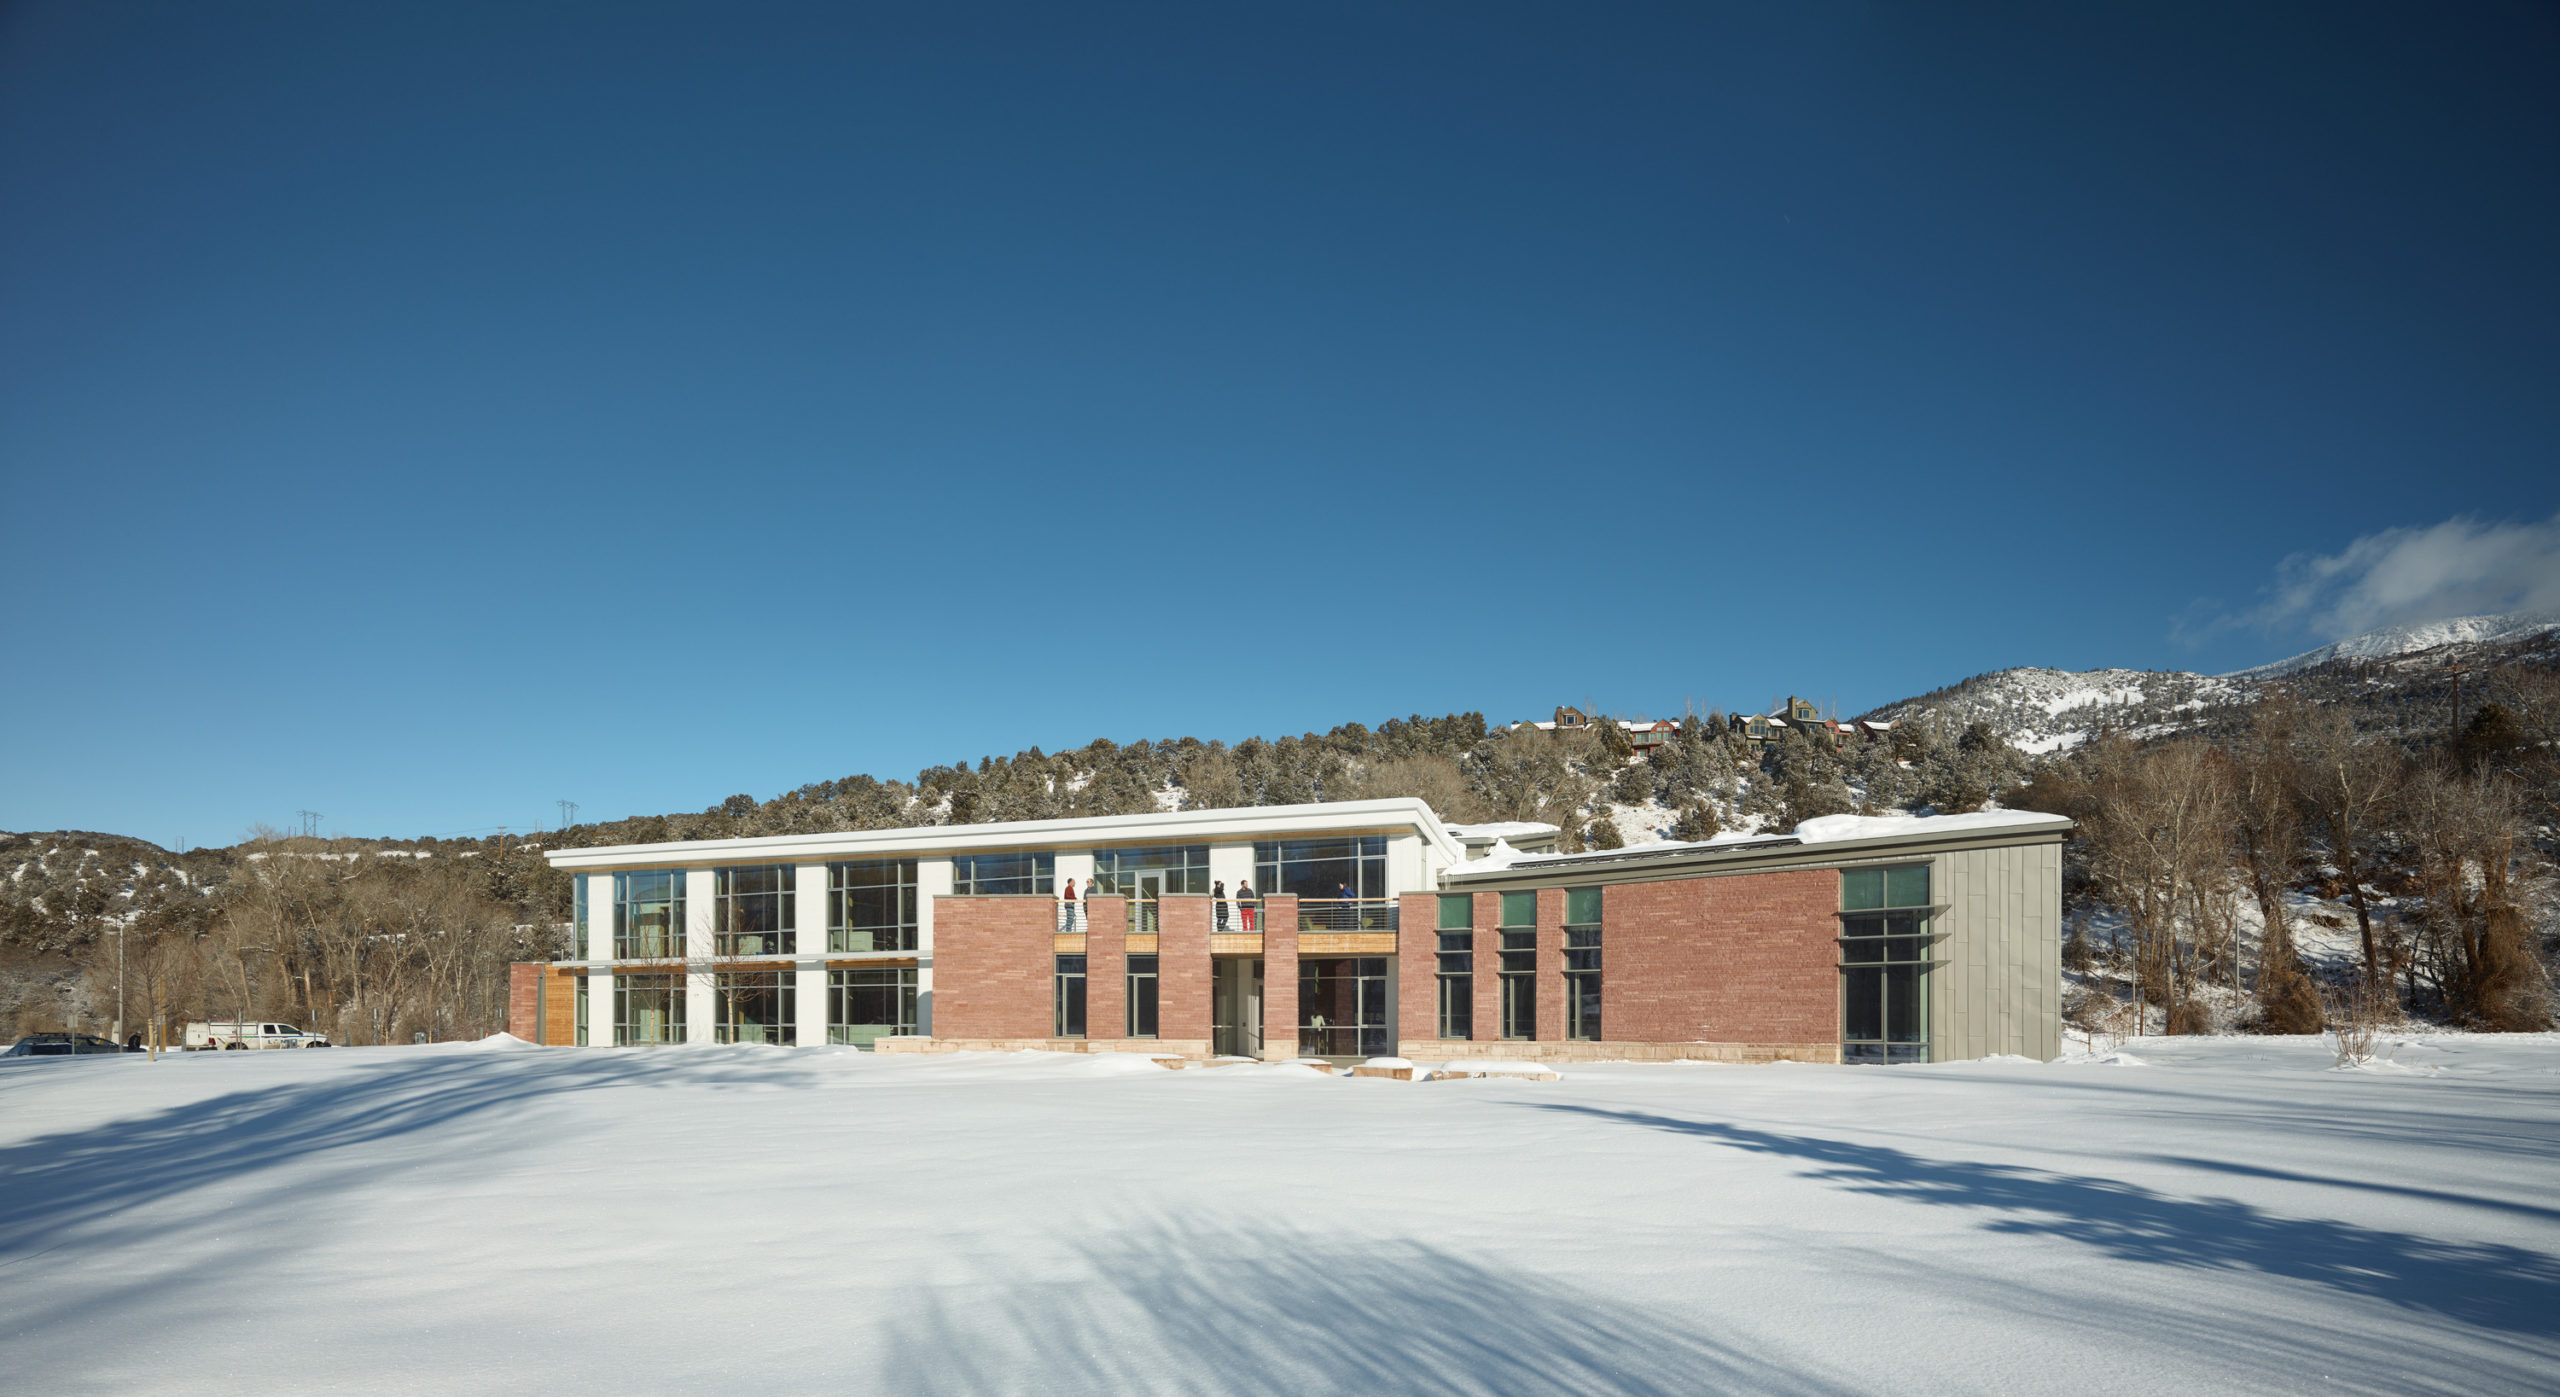 This Super-Efficient Building High In The Rocky Mountains Has No Central Heat 